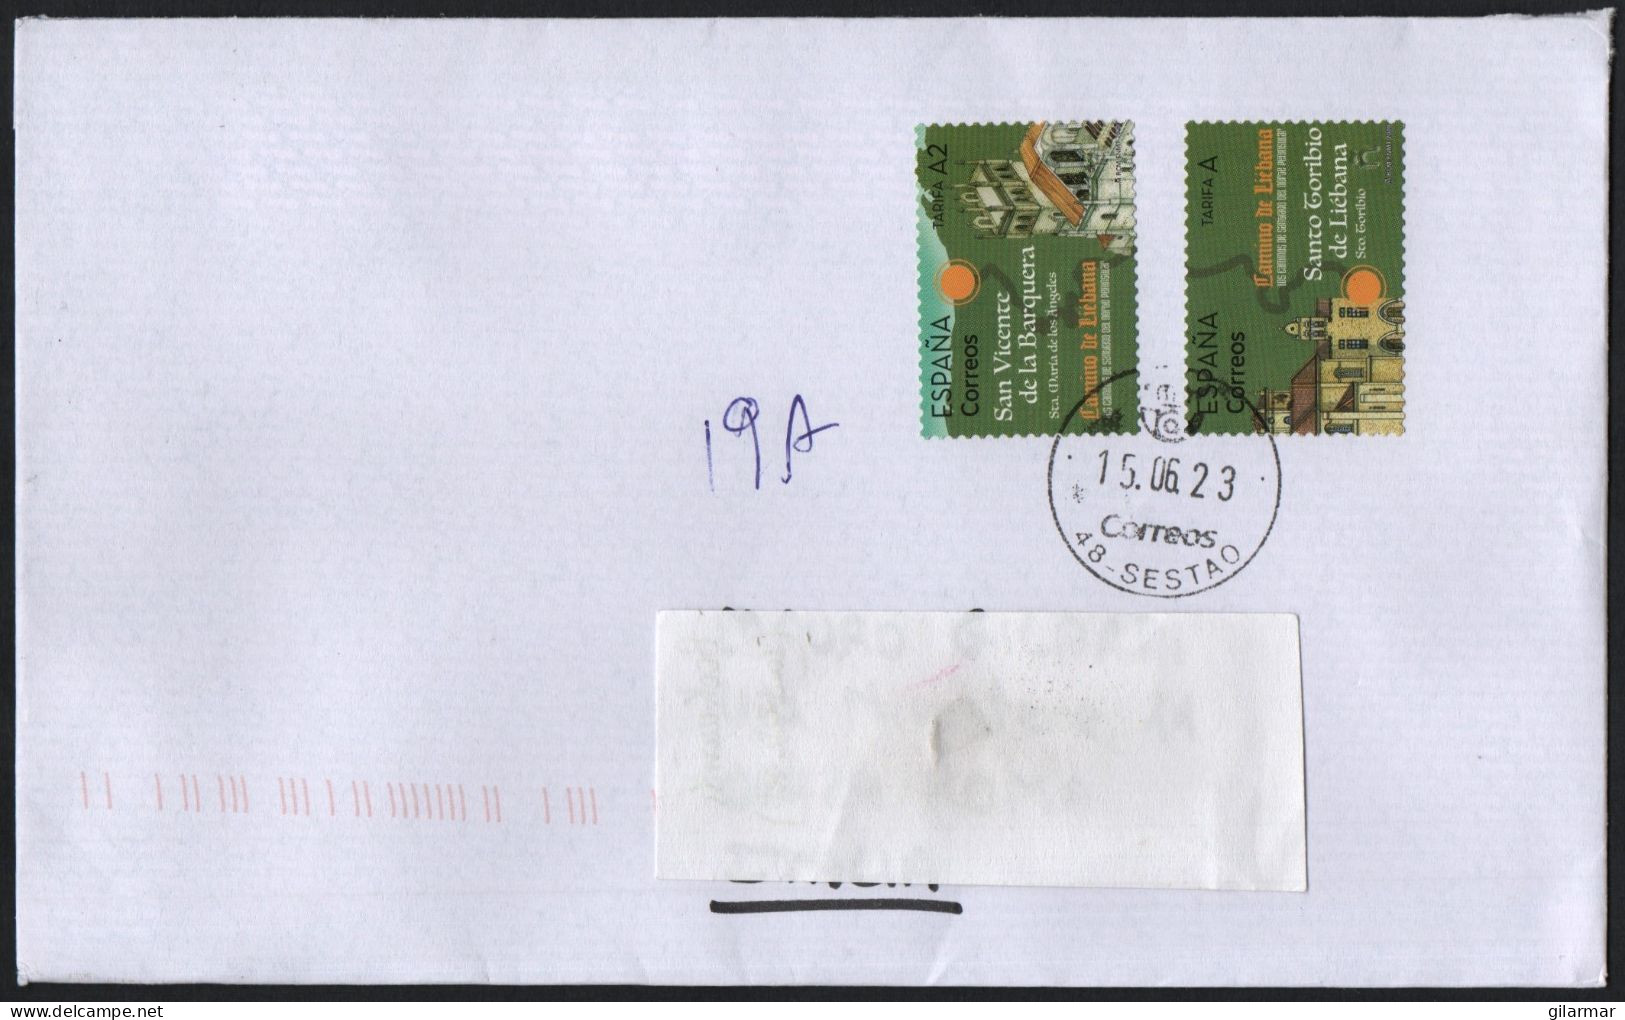 SPAIN 2023 - MAILED ENVELOPE - THE ROUTE OF ST. JAMES' WAY IN NORTHERN SPAIN - Covers & Documents